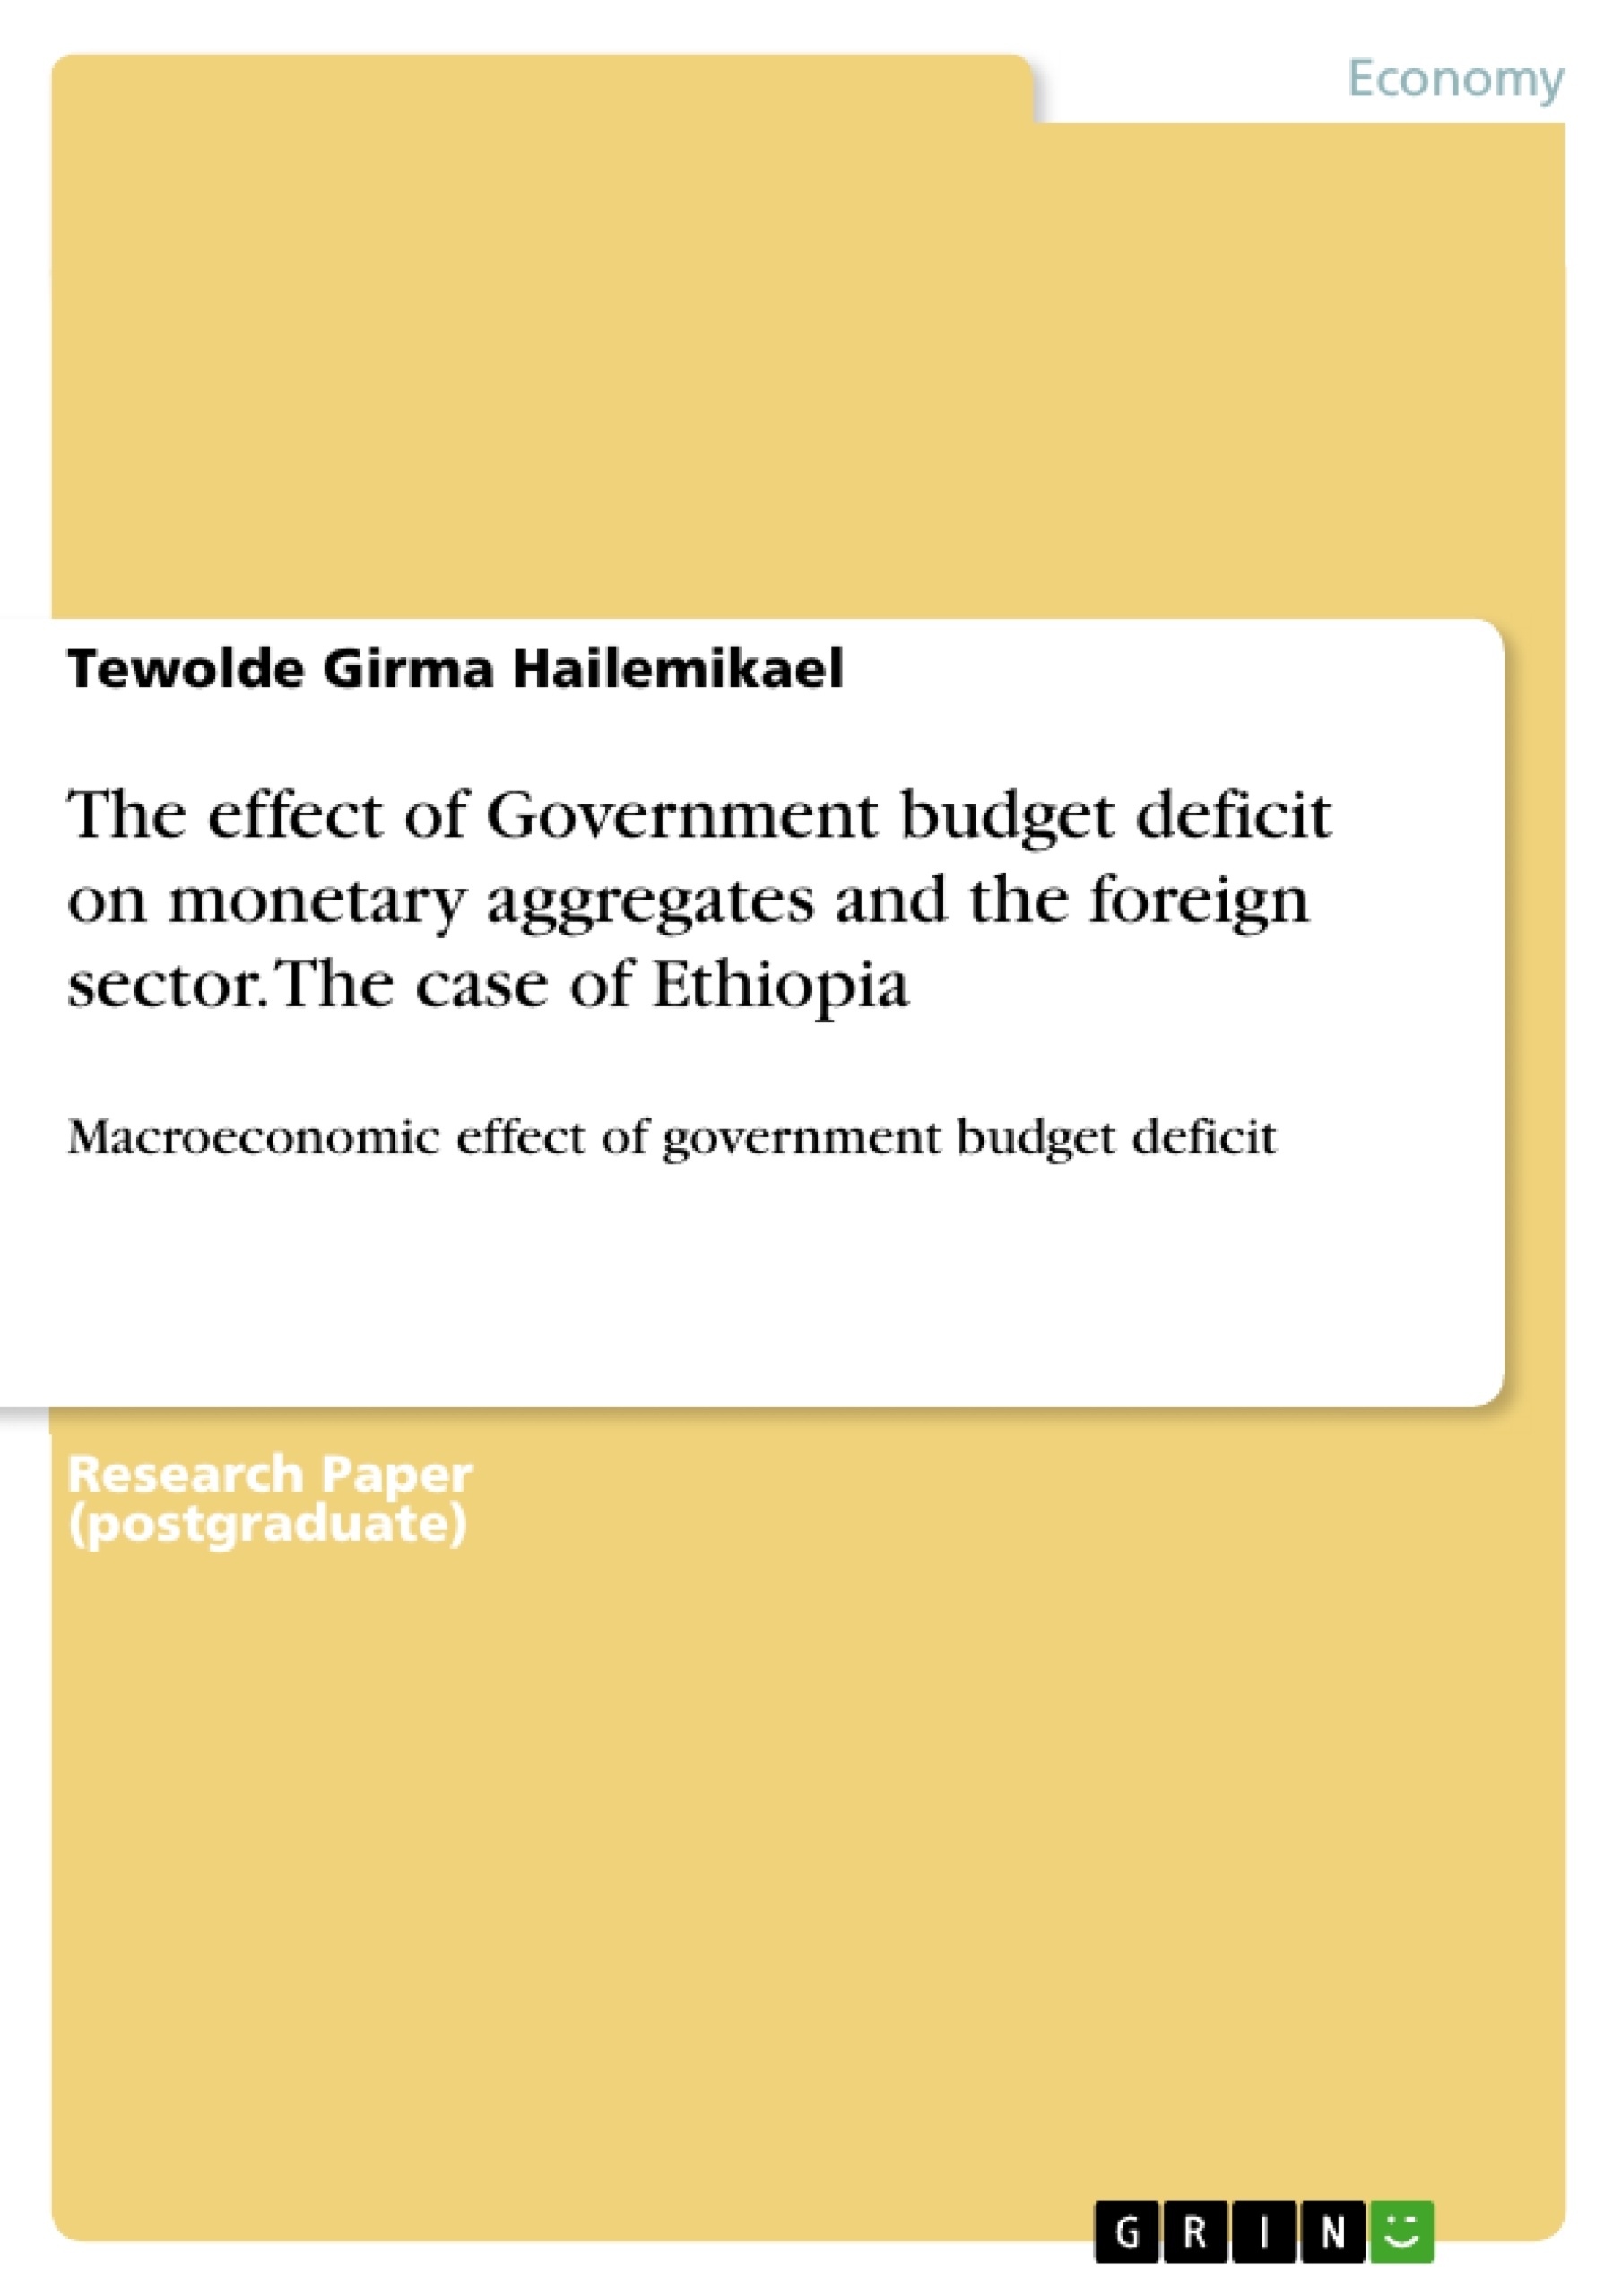 Titel: The effect of Government budget deficit on monetary aggregates and the foreign sector. The case of Ethiopia